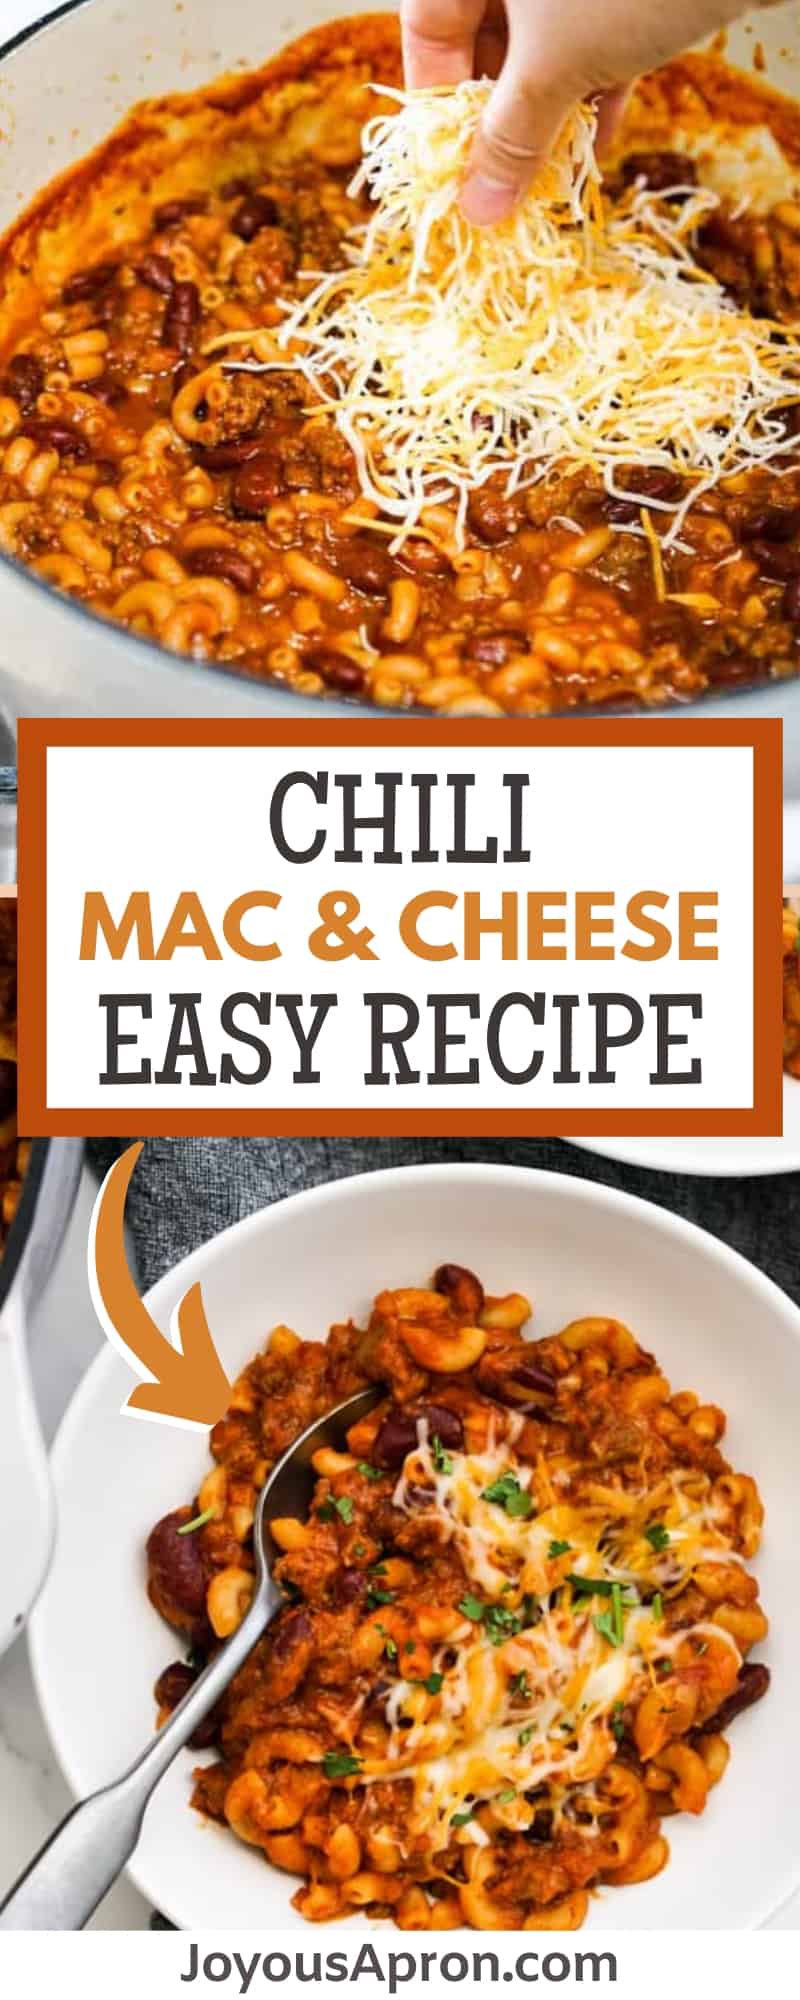 Chili Mac and Cheese - easy 30-minute one pot dinner combining macaroni and cheese and chili, to form a thick and hearty one pot meal. Loaded with pasta, black beans, tomatoes, chili powder, and cheese. via @joyousapron